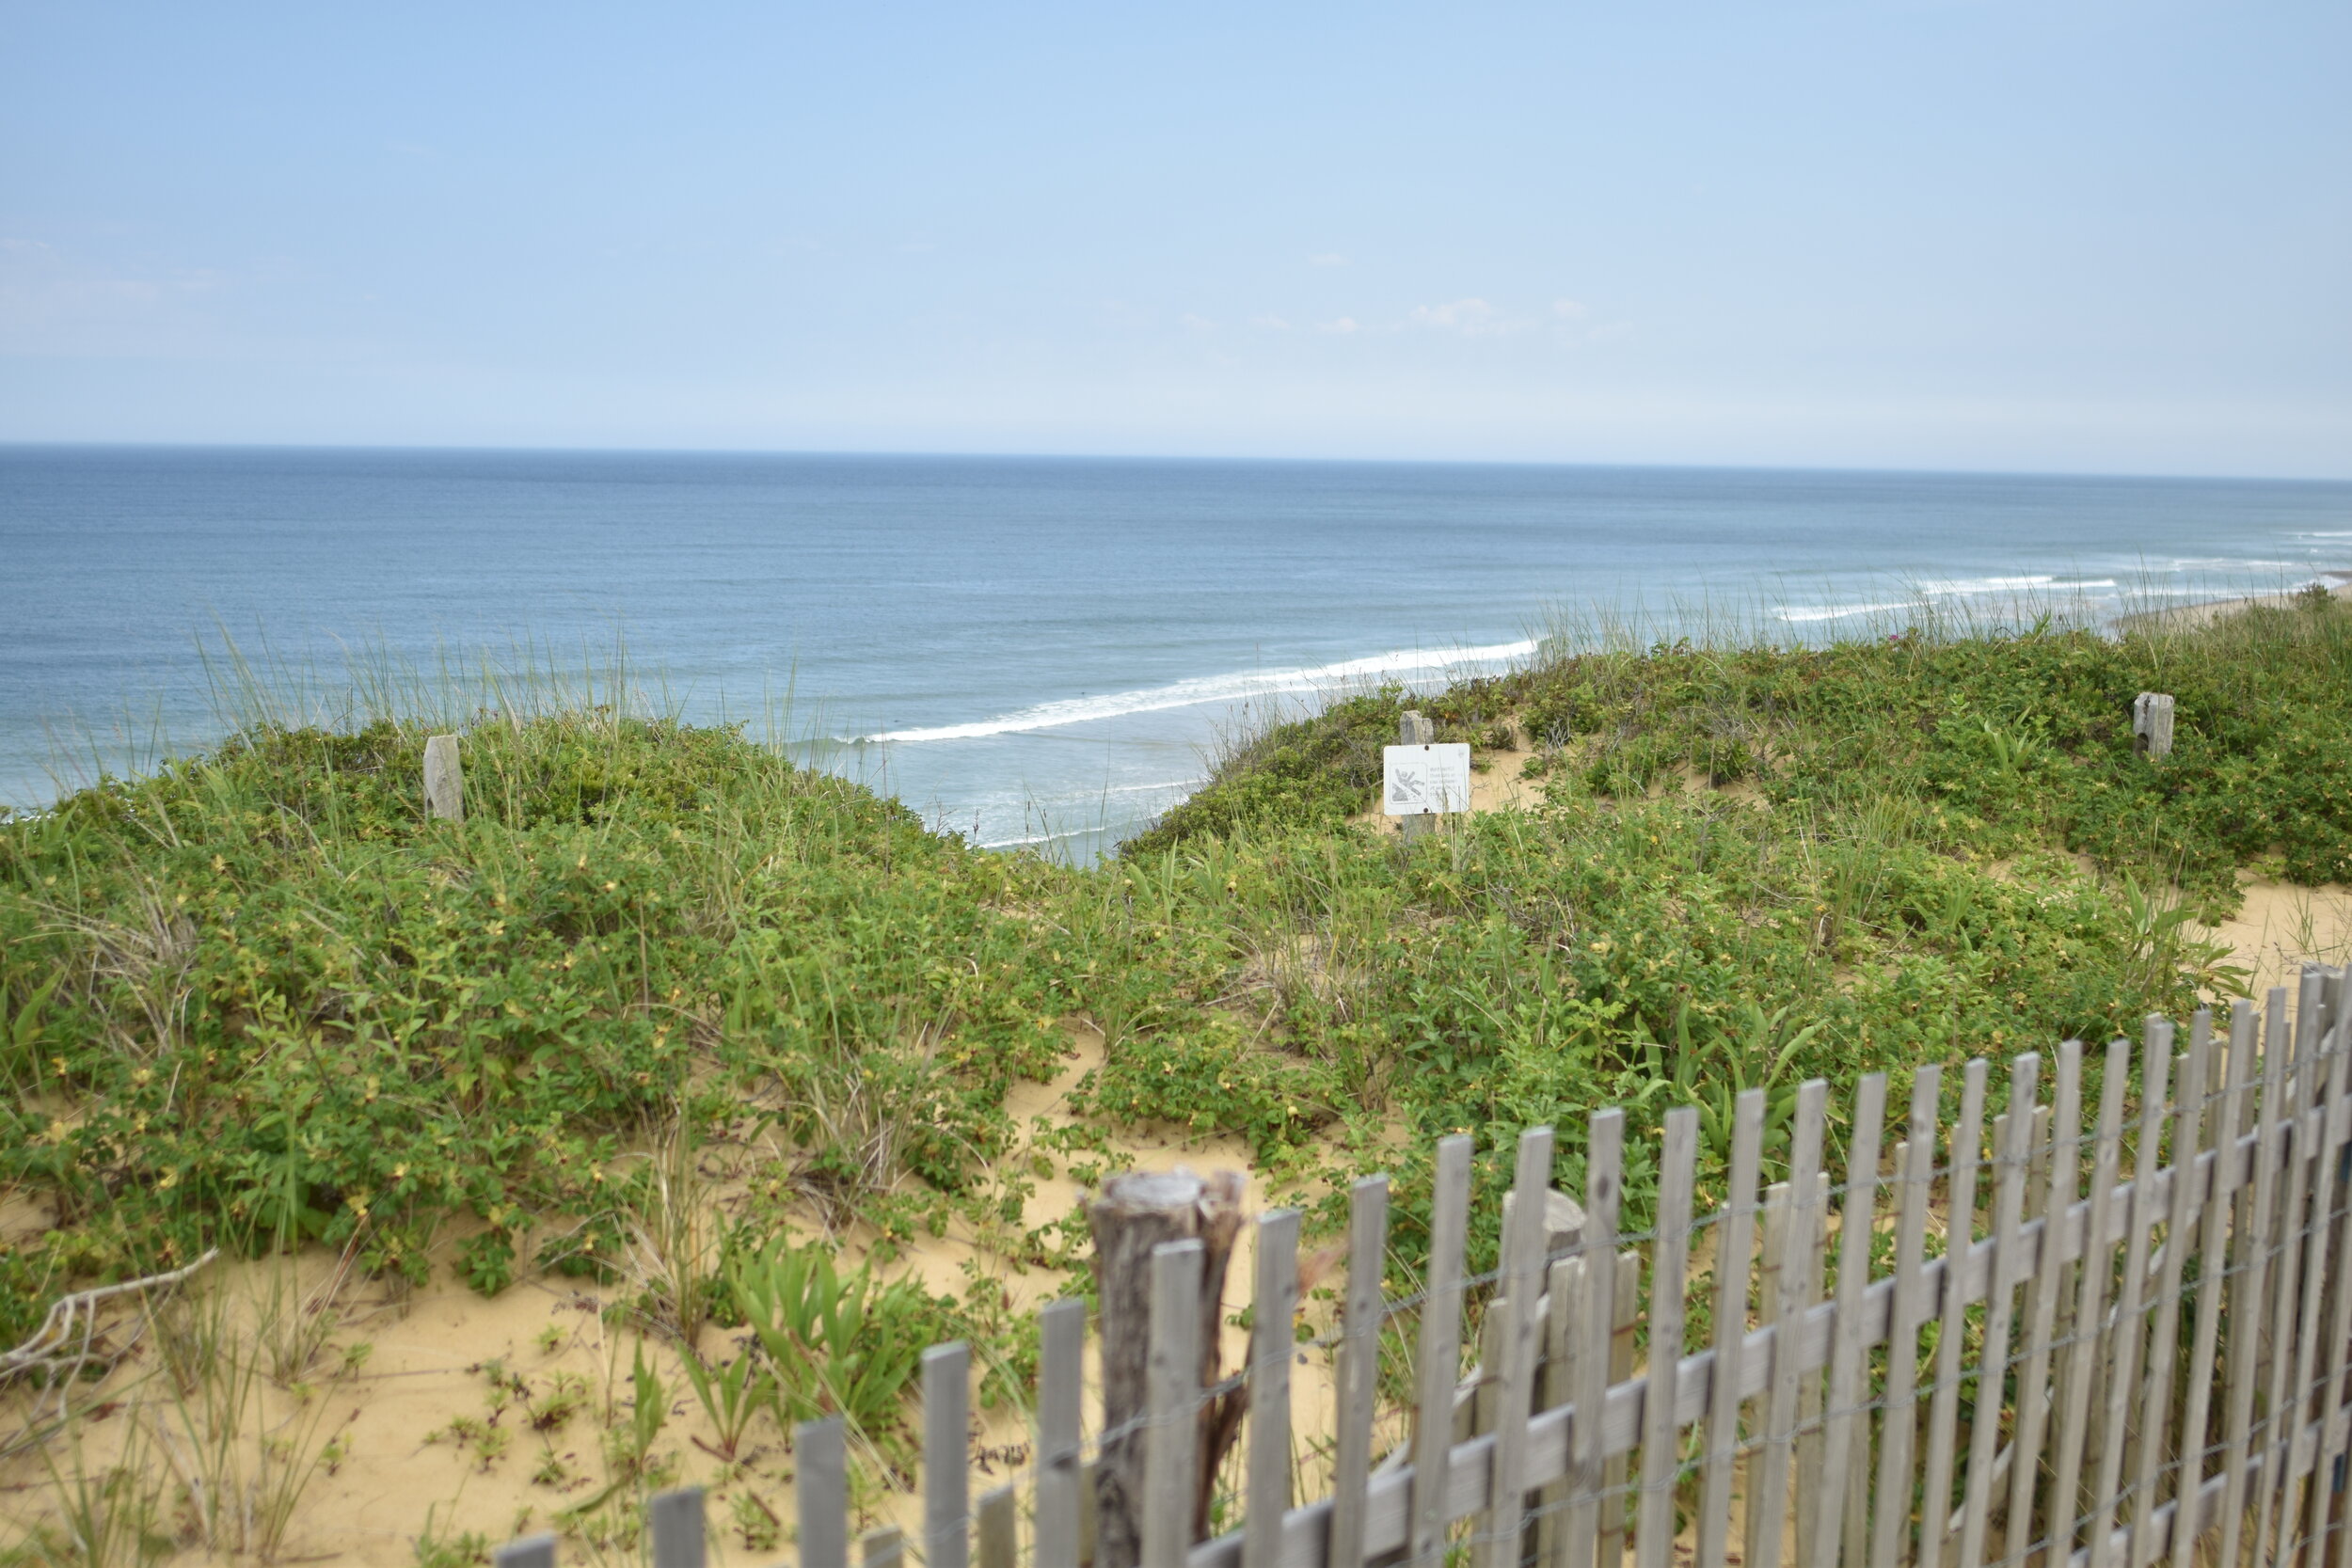 THINGS TO DO IN CAPE COD Marconi and the South Wellfleet Wireless Telegraph Station